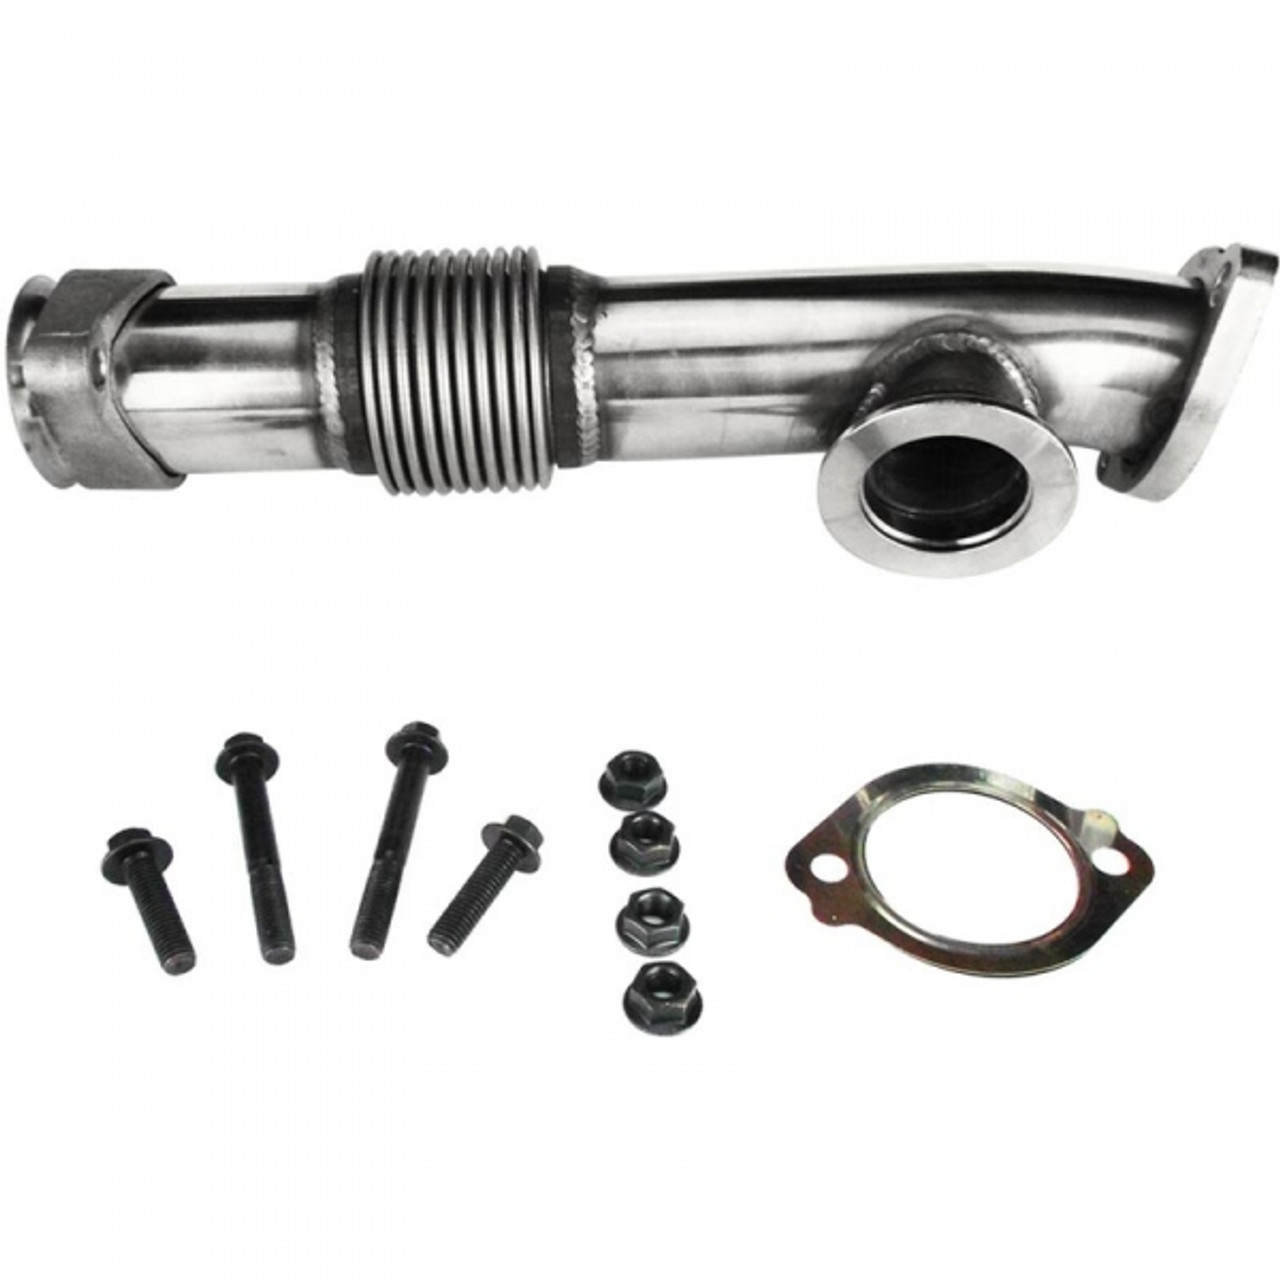 Bostech Turbocharger Up Pipe Kit (Right Bank, Manifold to Y-Pipe) 2004 to 2005 6.0L Powerstroke (BSTEPK02605)-Main View